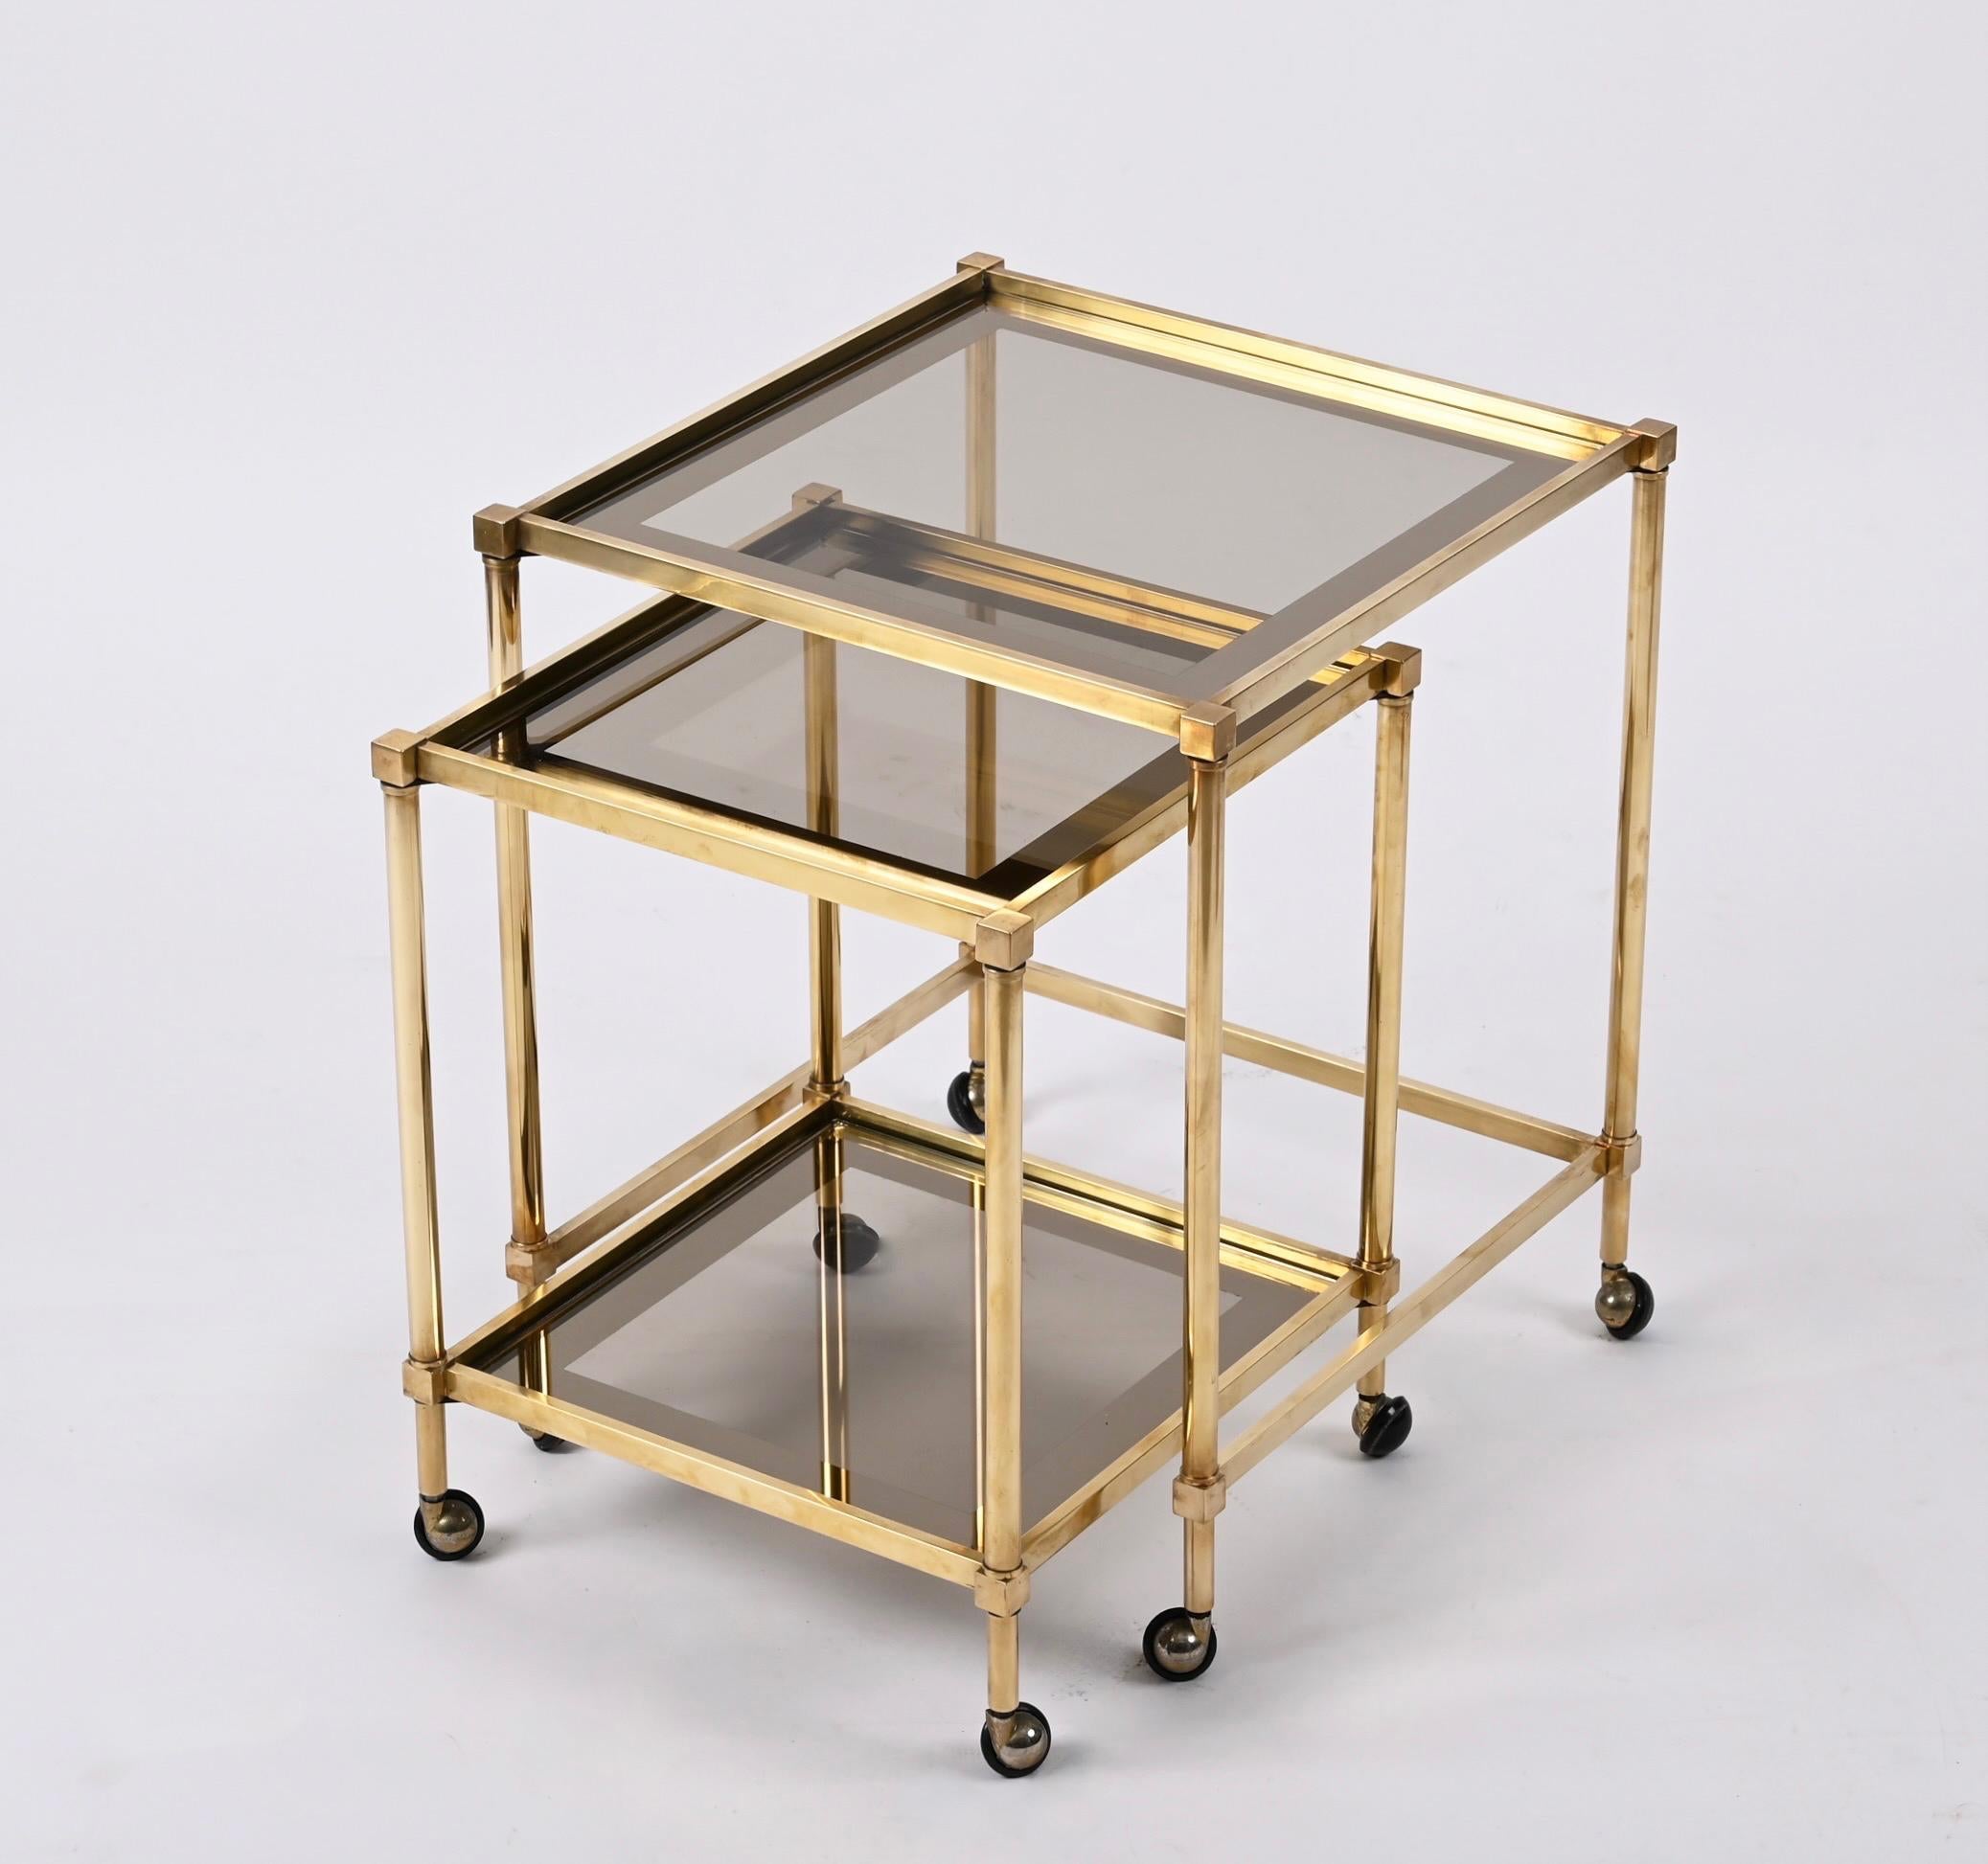 Pair of Maison Jansen Brass Mirrored Border Nesting Tables with Glass Top, 1970s For Sale 7